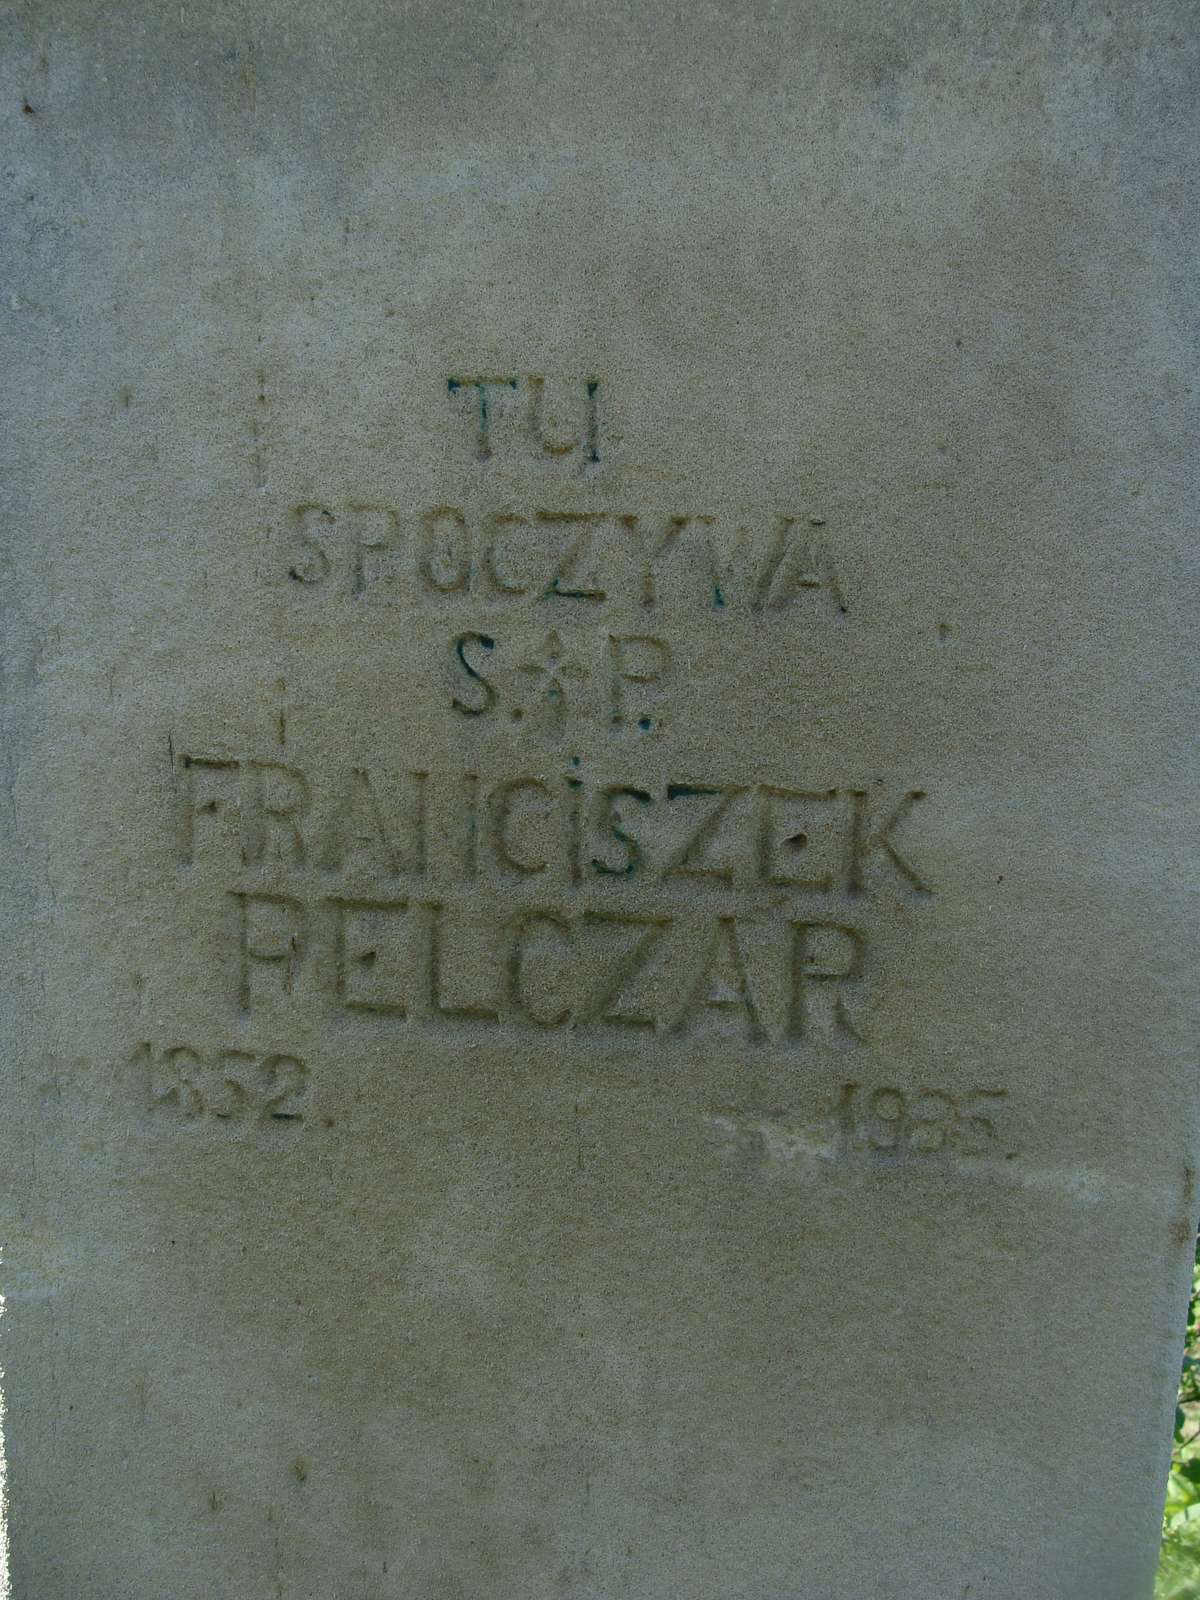 Inscription from the gravestone of Franciszek Relczar, cemetery in Ihrownica